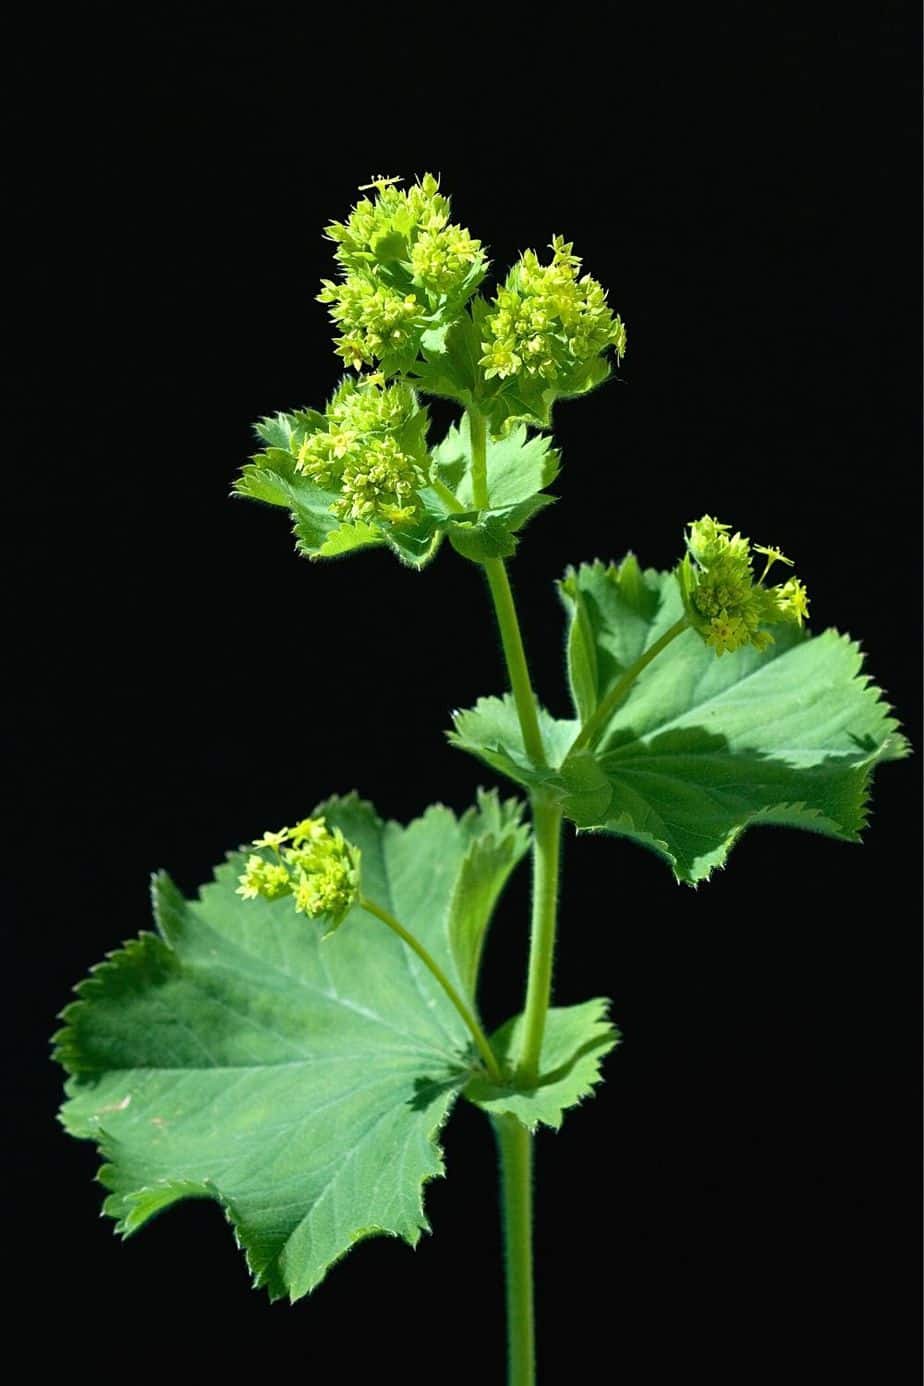 The shady mornings and afternoon of the northwest facing garden is what the Alchemilla Mollis (Lady's Mantle) loves 